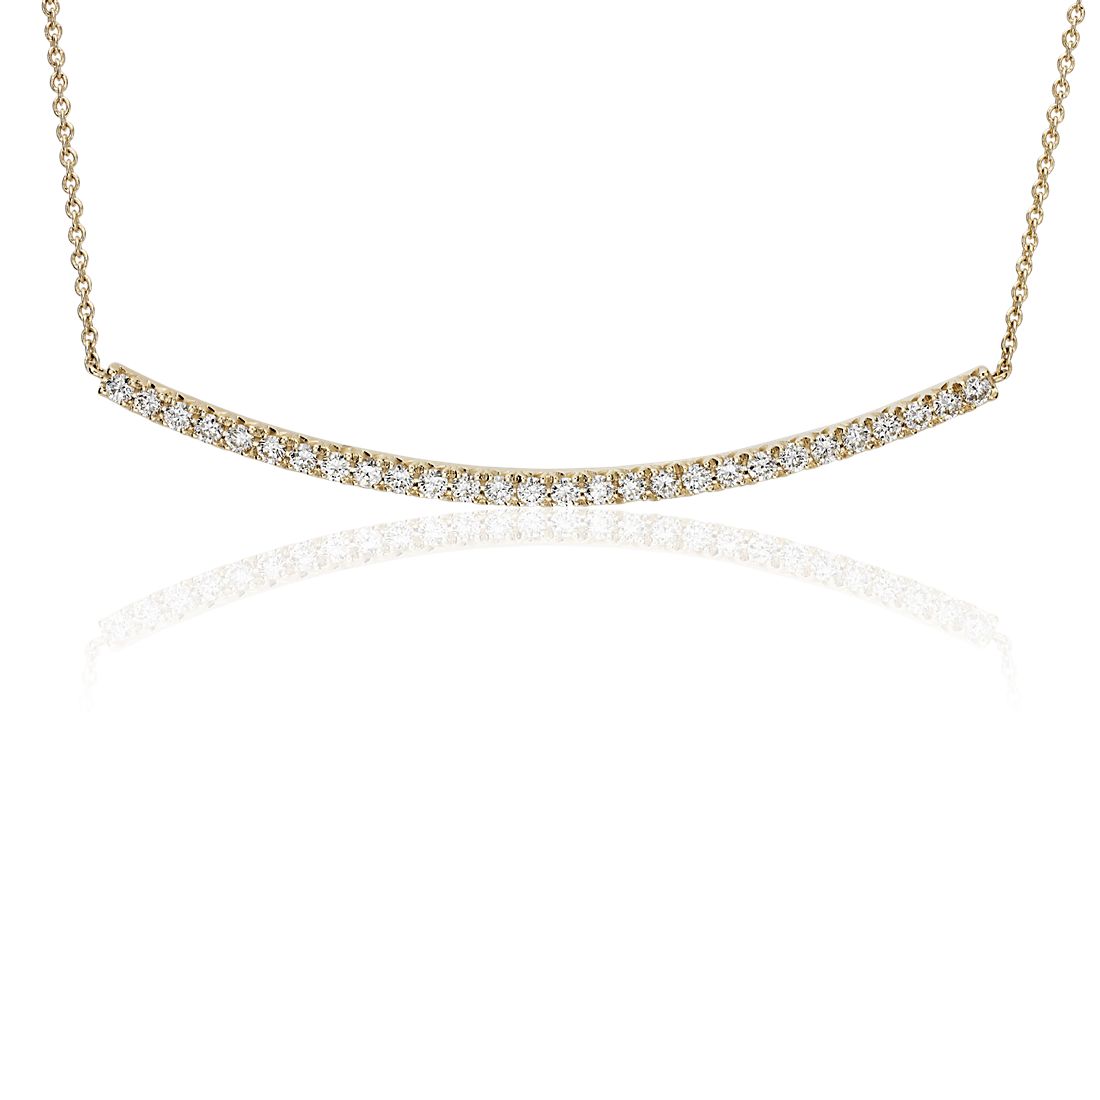 Diamond Delicate Curved Bar Necklace in 14k Yellow Gold